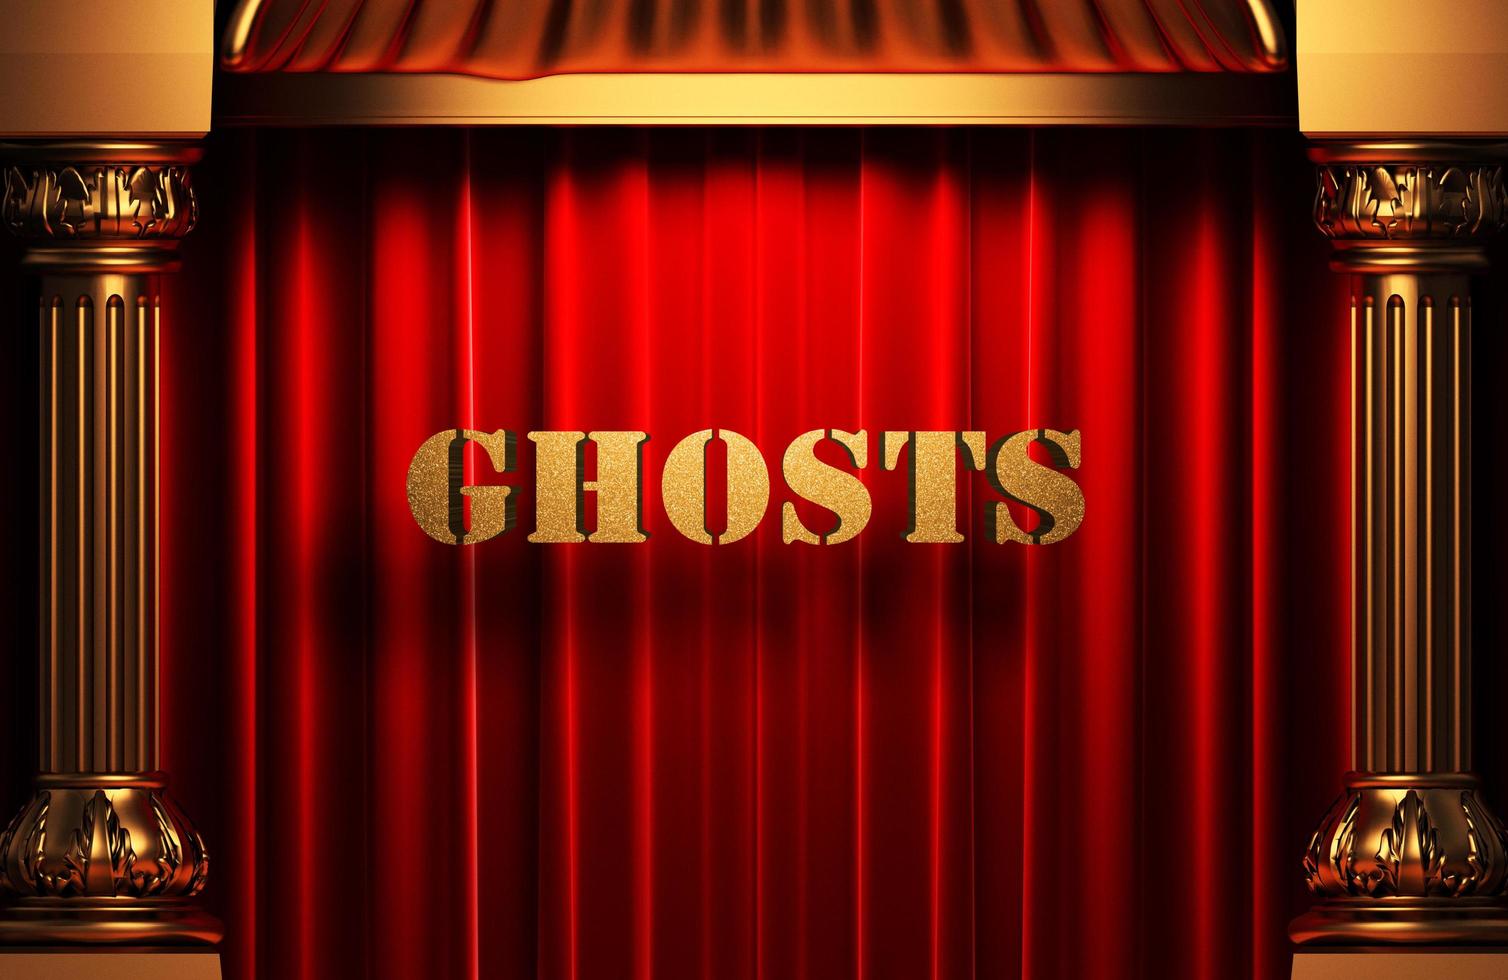 ghosts golden word on red curtain photo